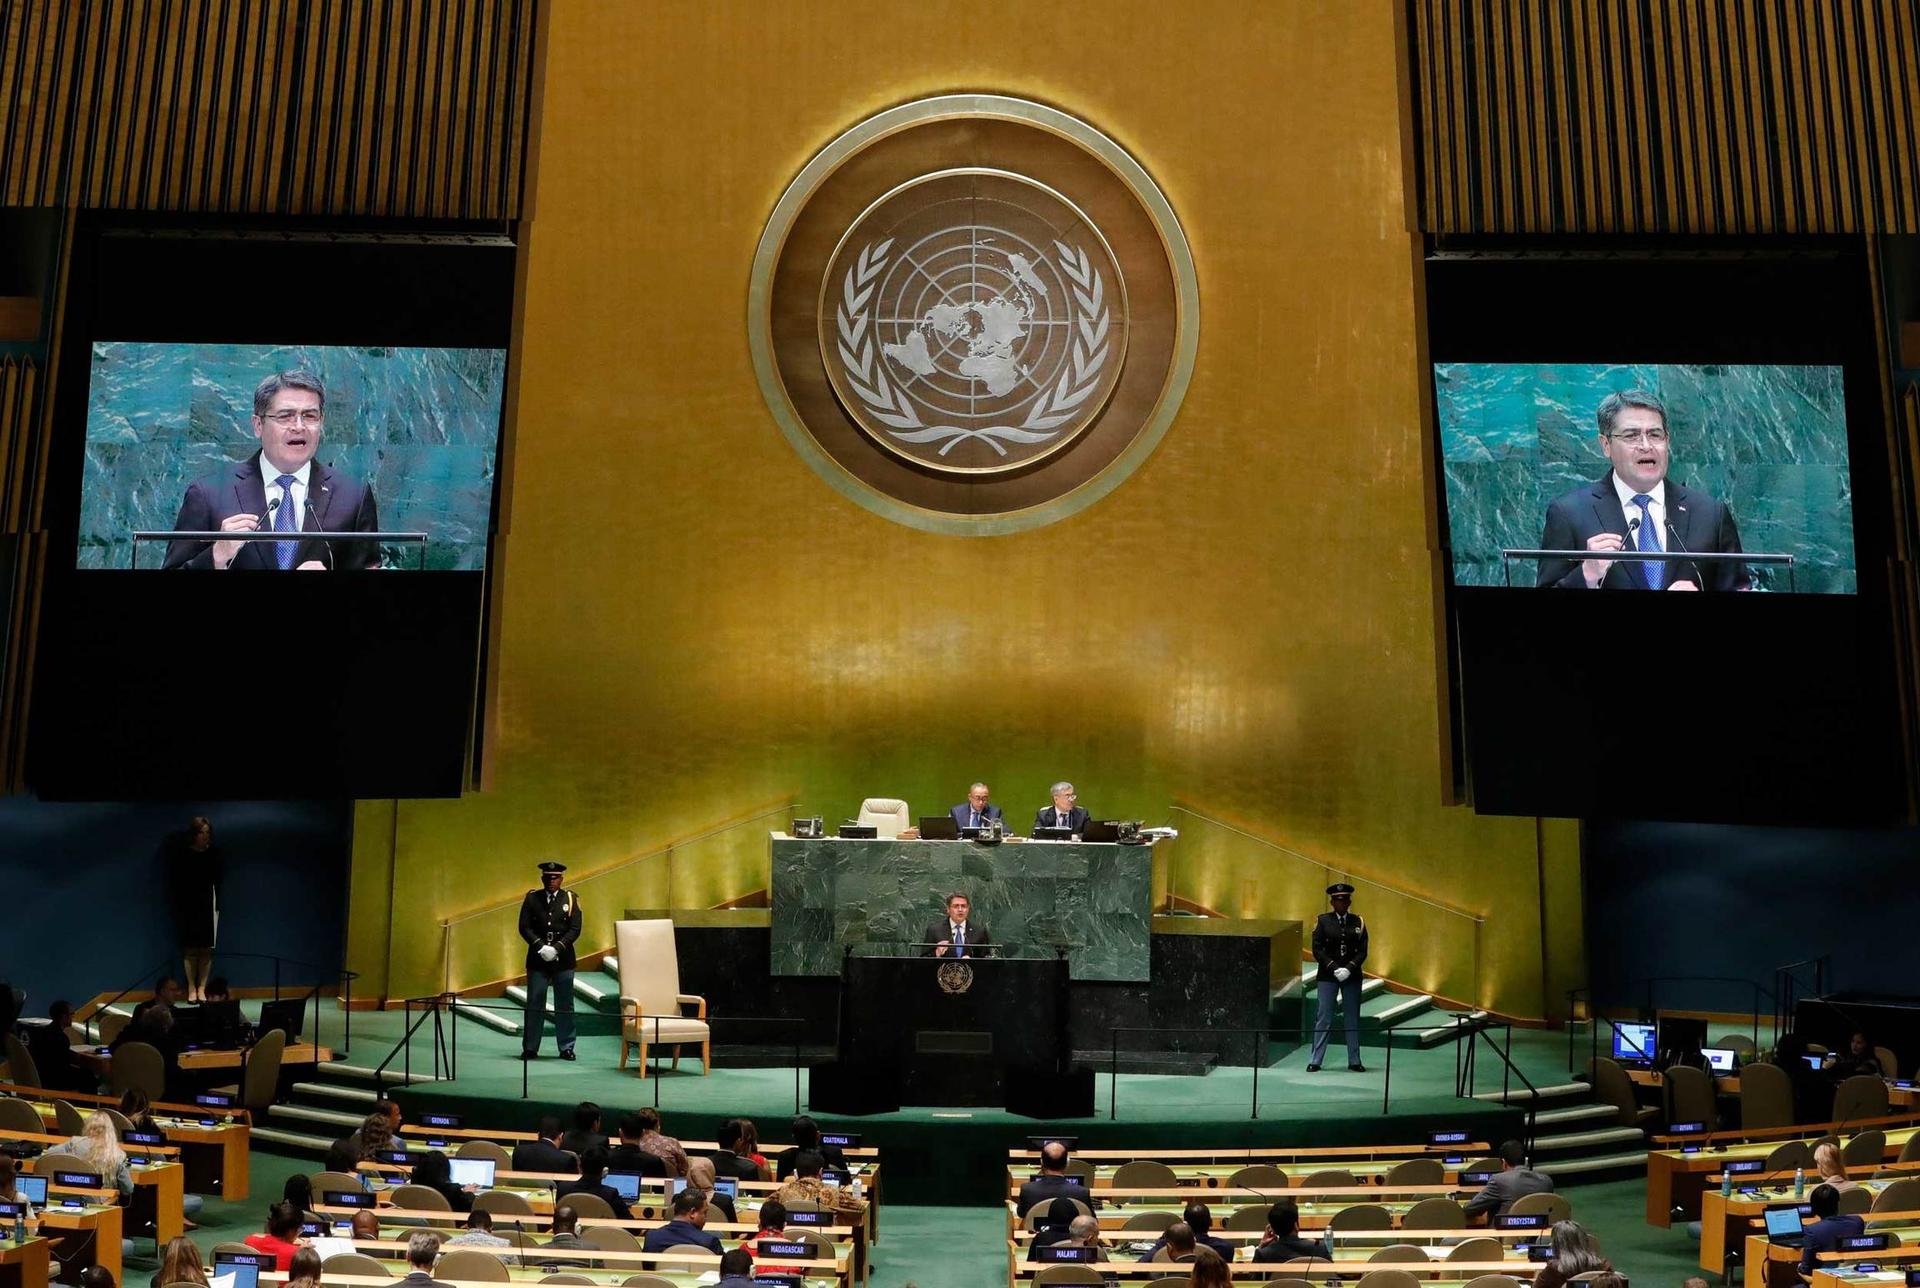 A man speaks at the UN. His image is seen in two screens at left and right of the stage.